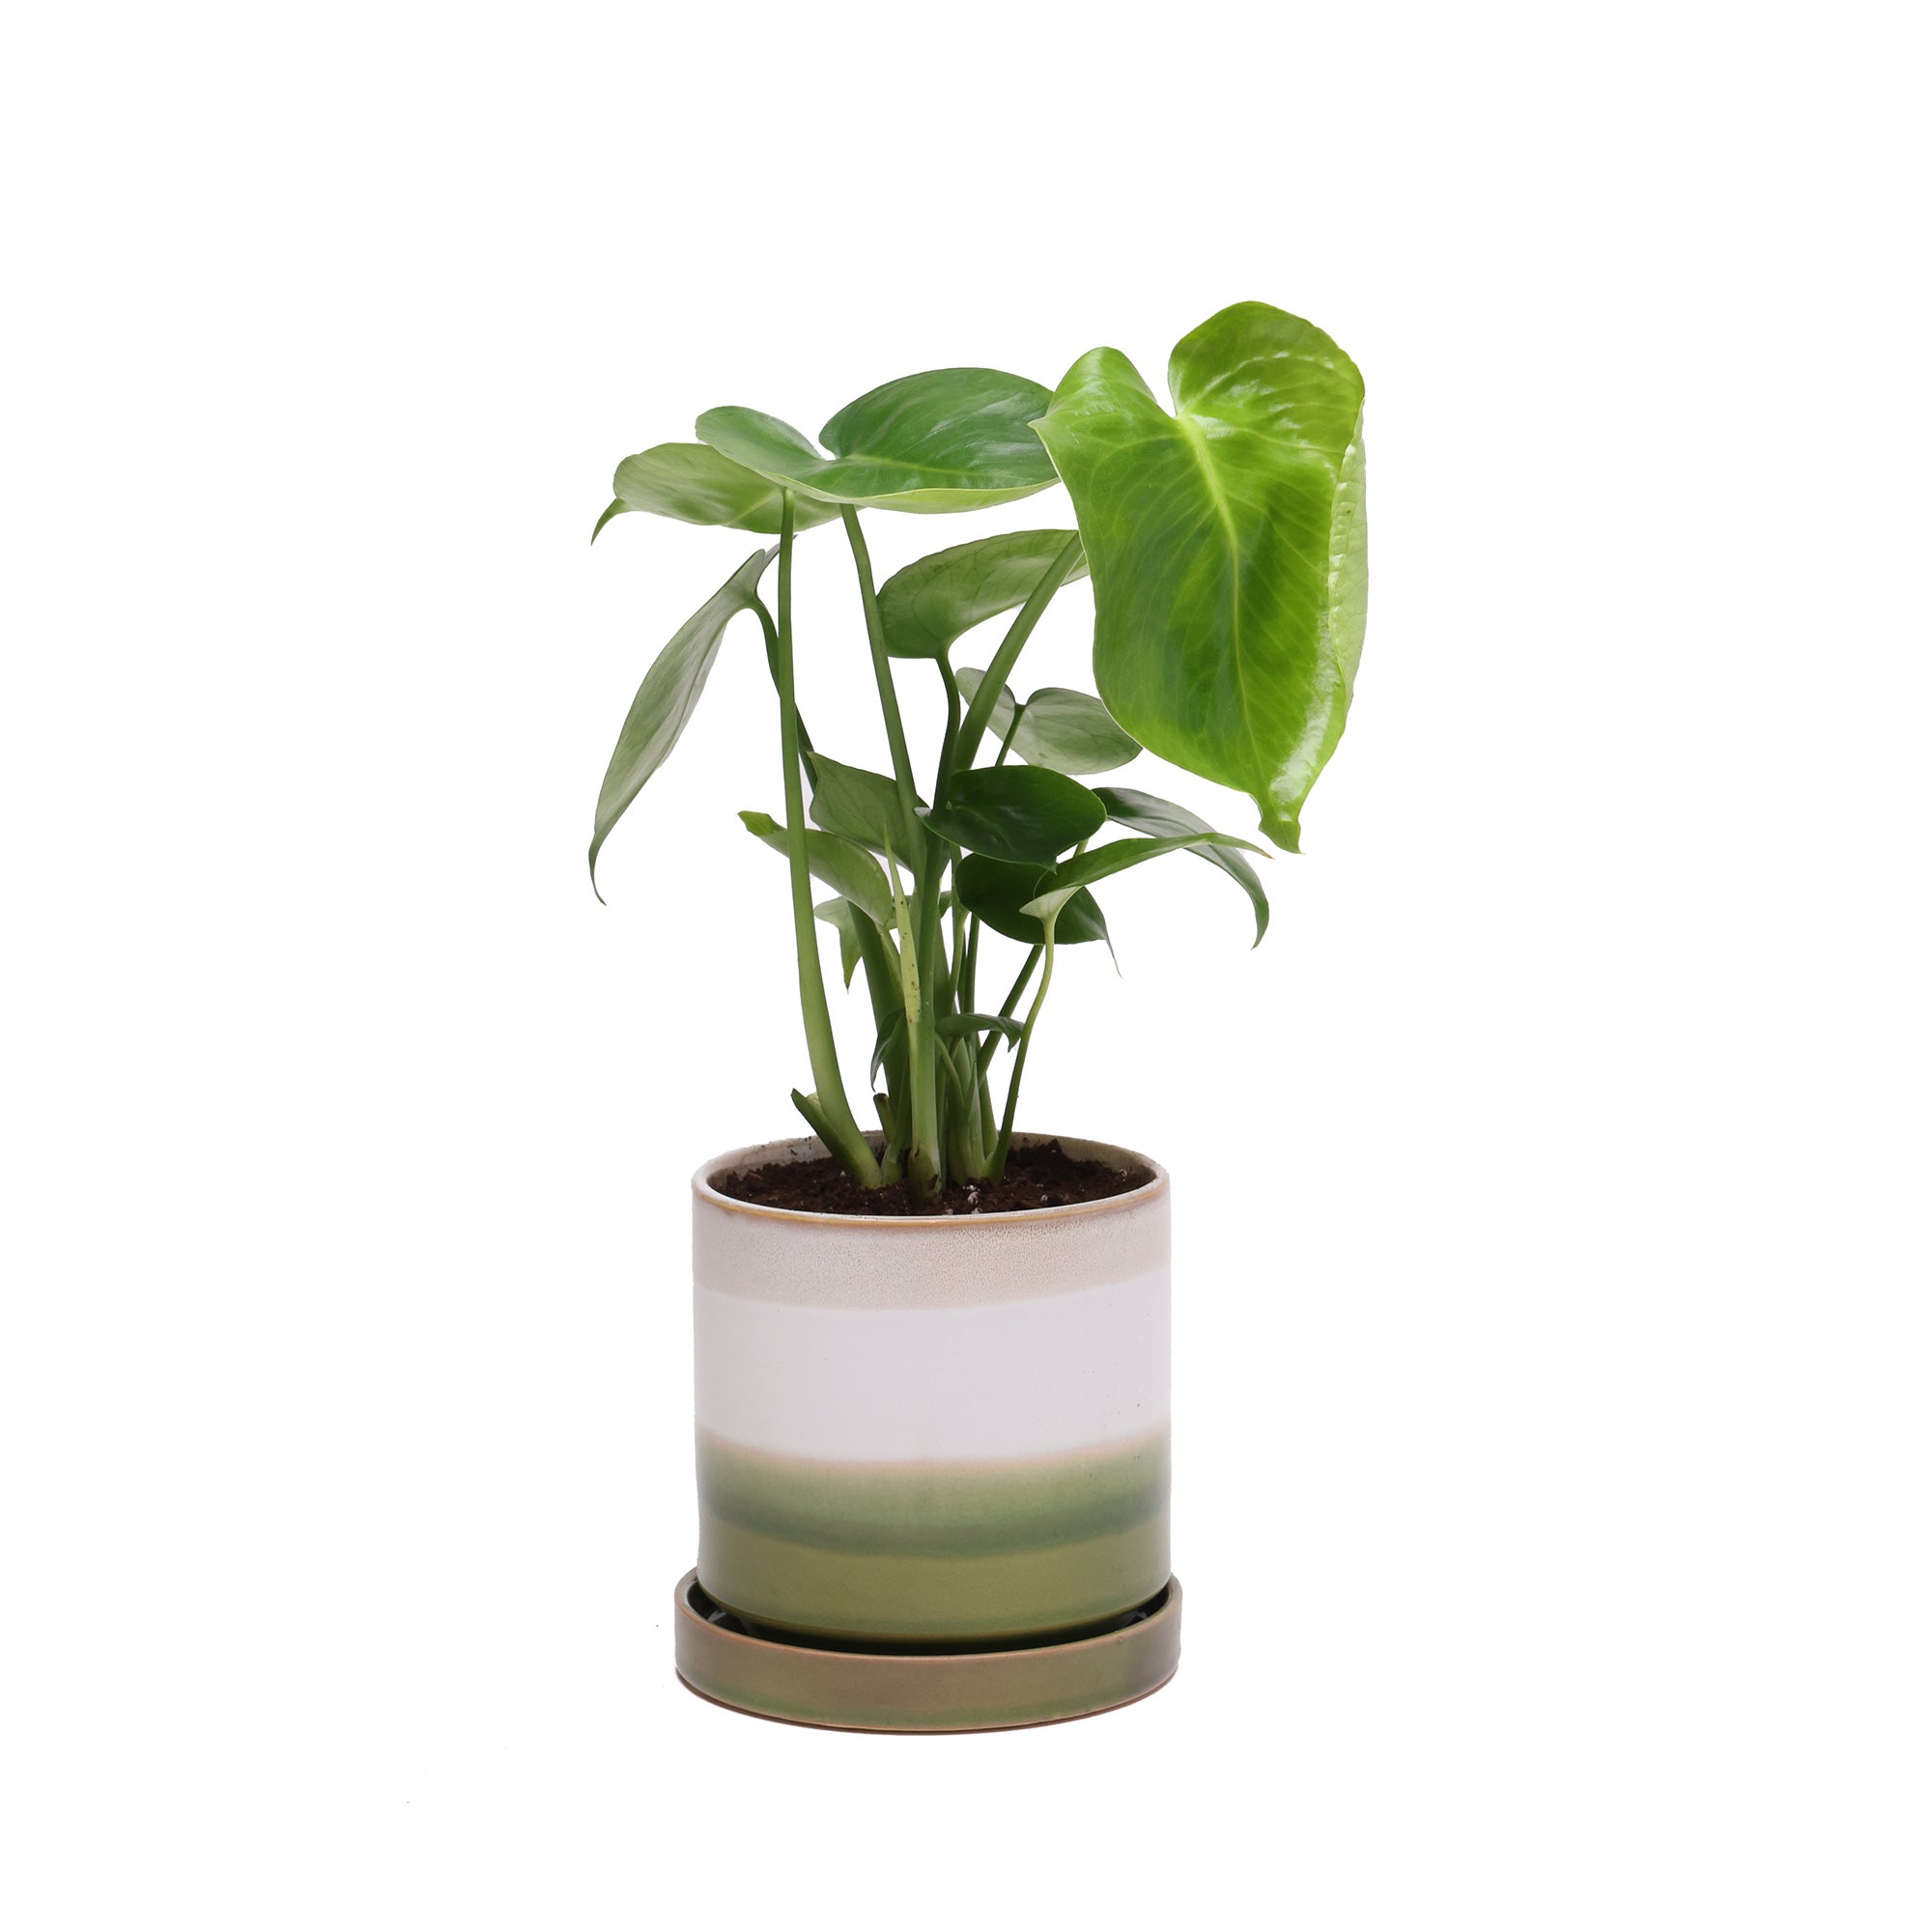 A vibrant Potted Monstera 4” in Minute with broad leaves in a white ceramic pot with green stripes, isolated on a white background by Chive Studio.